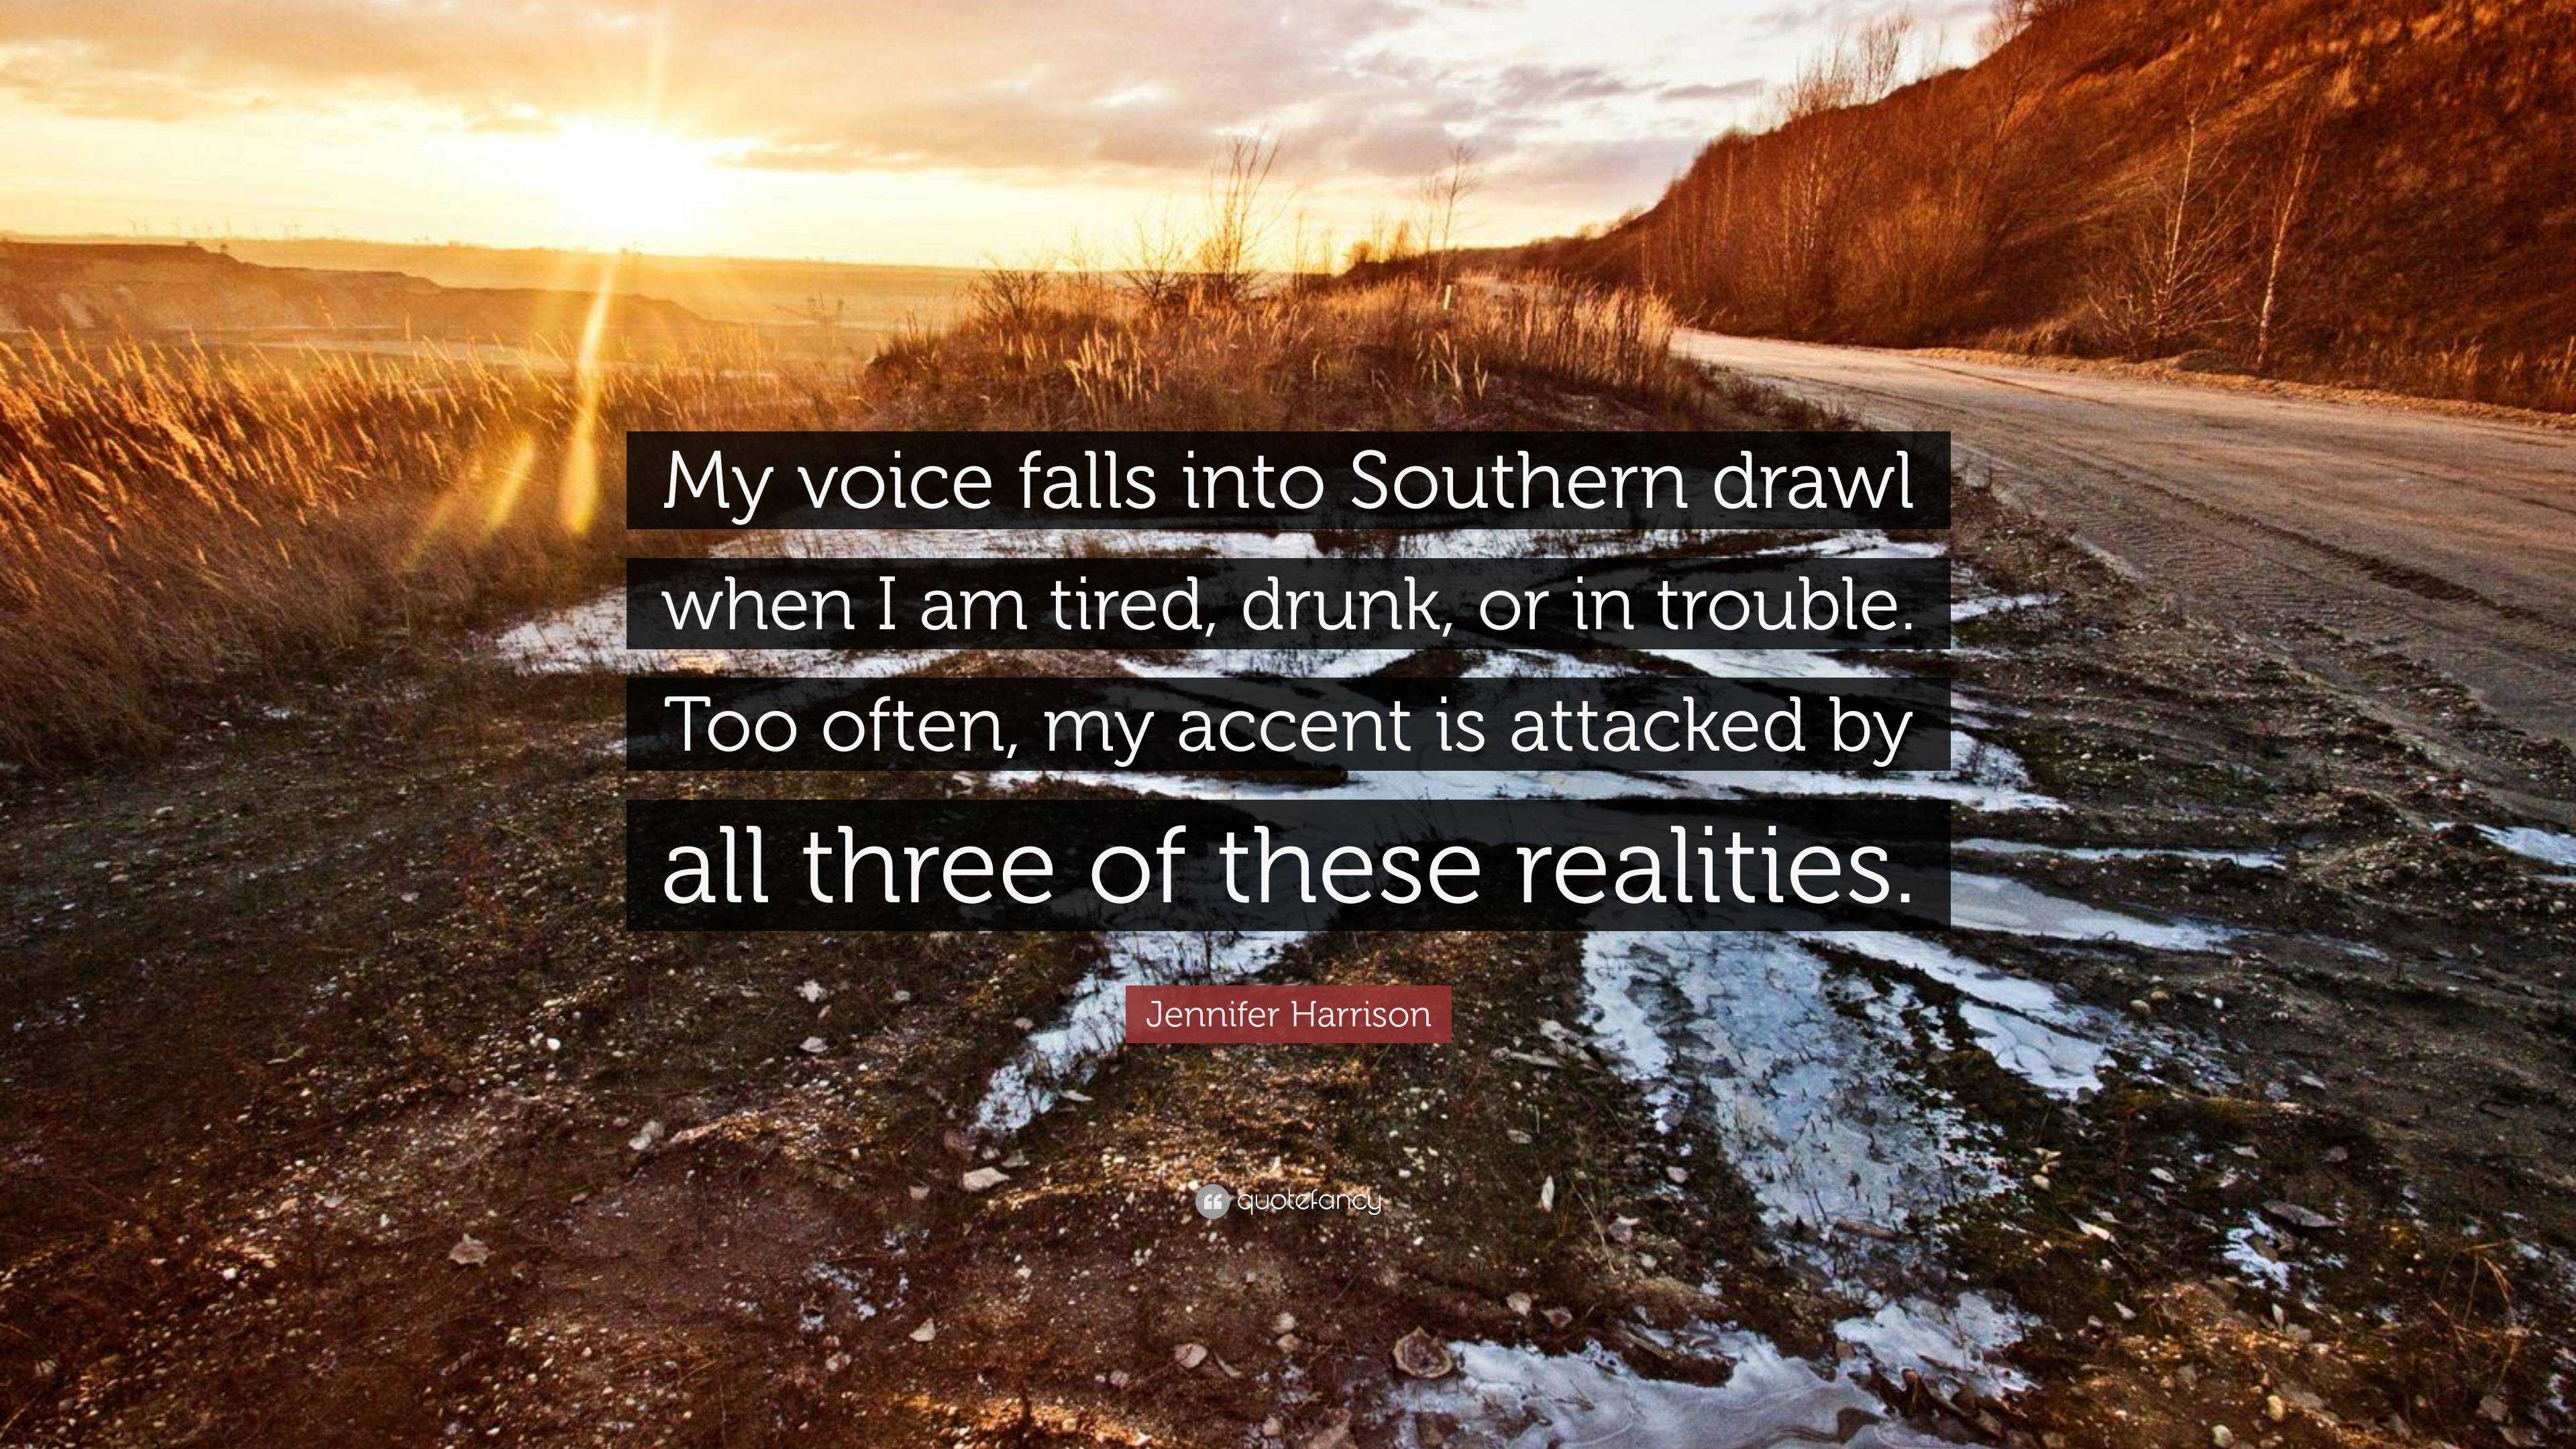 Jennifer Harrison Quote: “My voice falls into Southern drawl when I am  tired, drunk, or in trouble. Too often, my accent is attacked by all three  ”